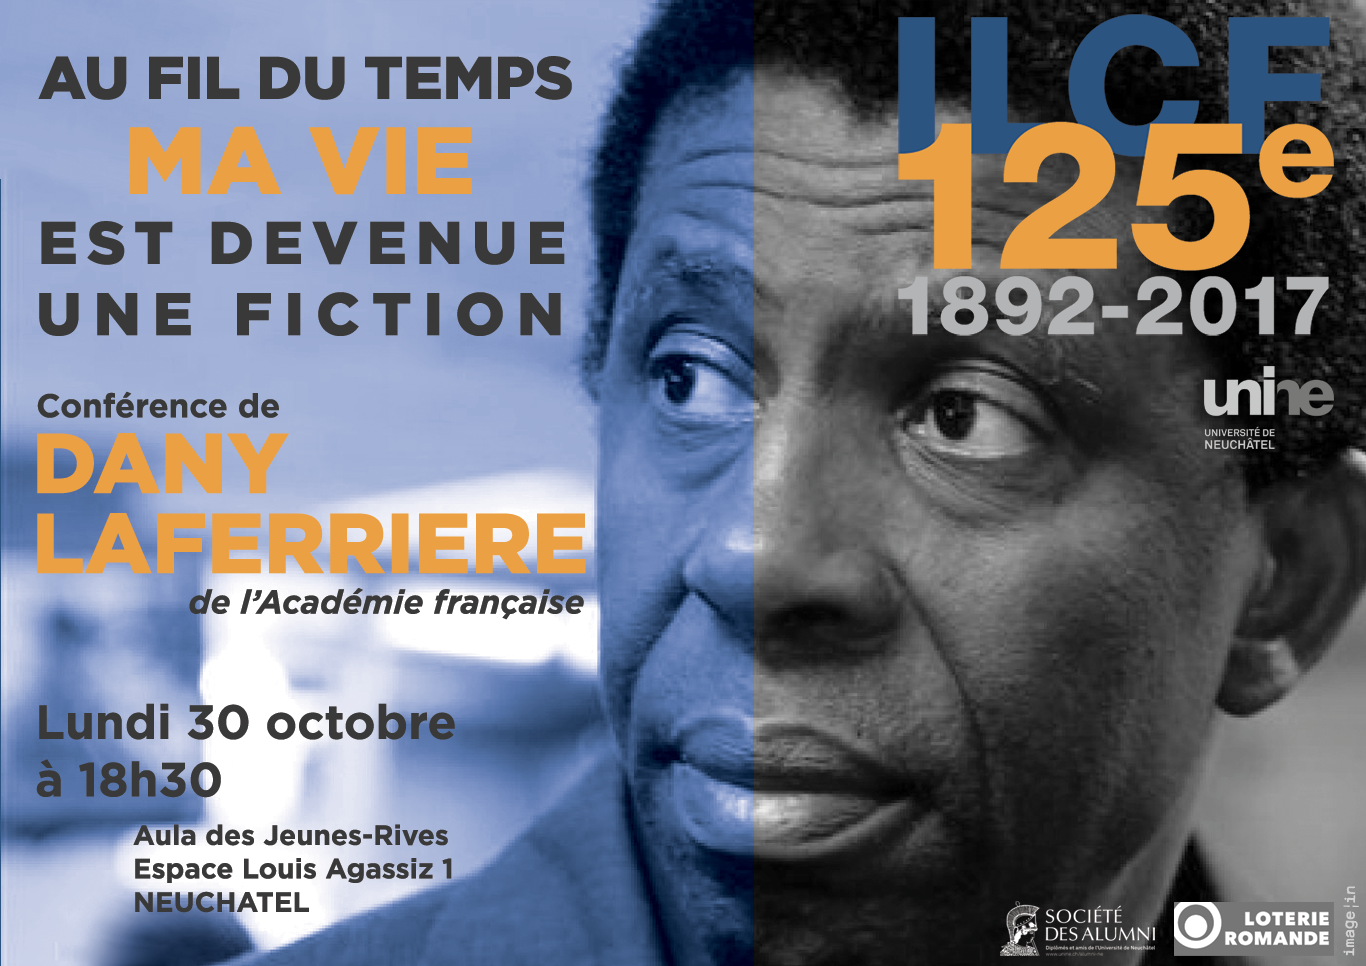 ILCF_125_Dany_Laferriere_2017.png